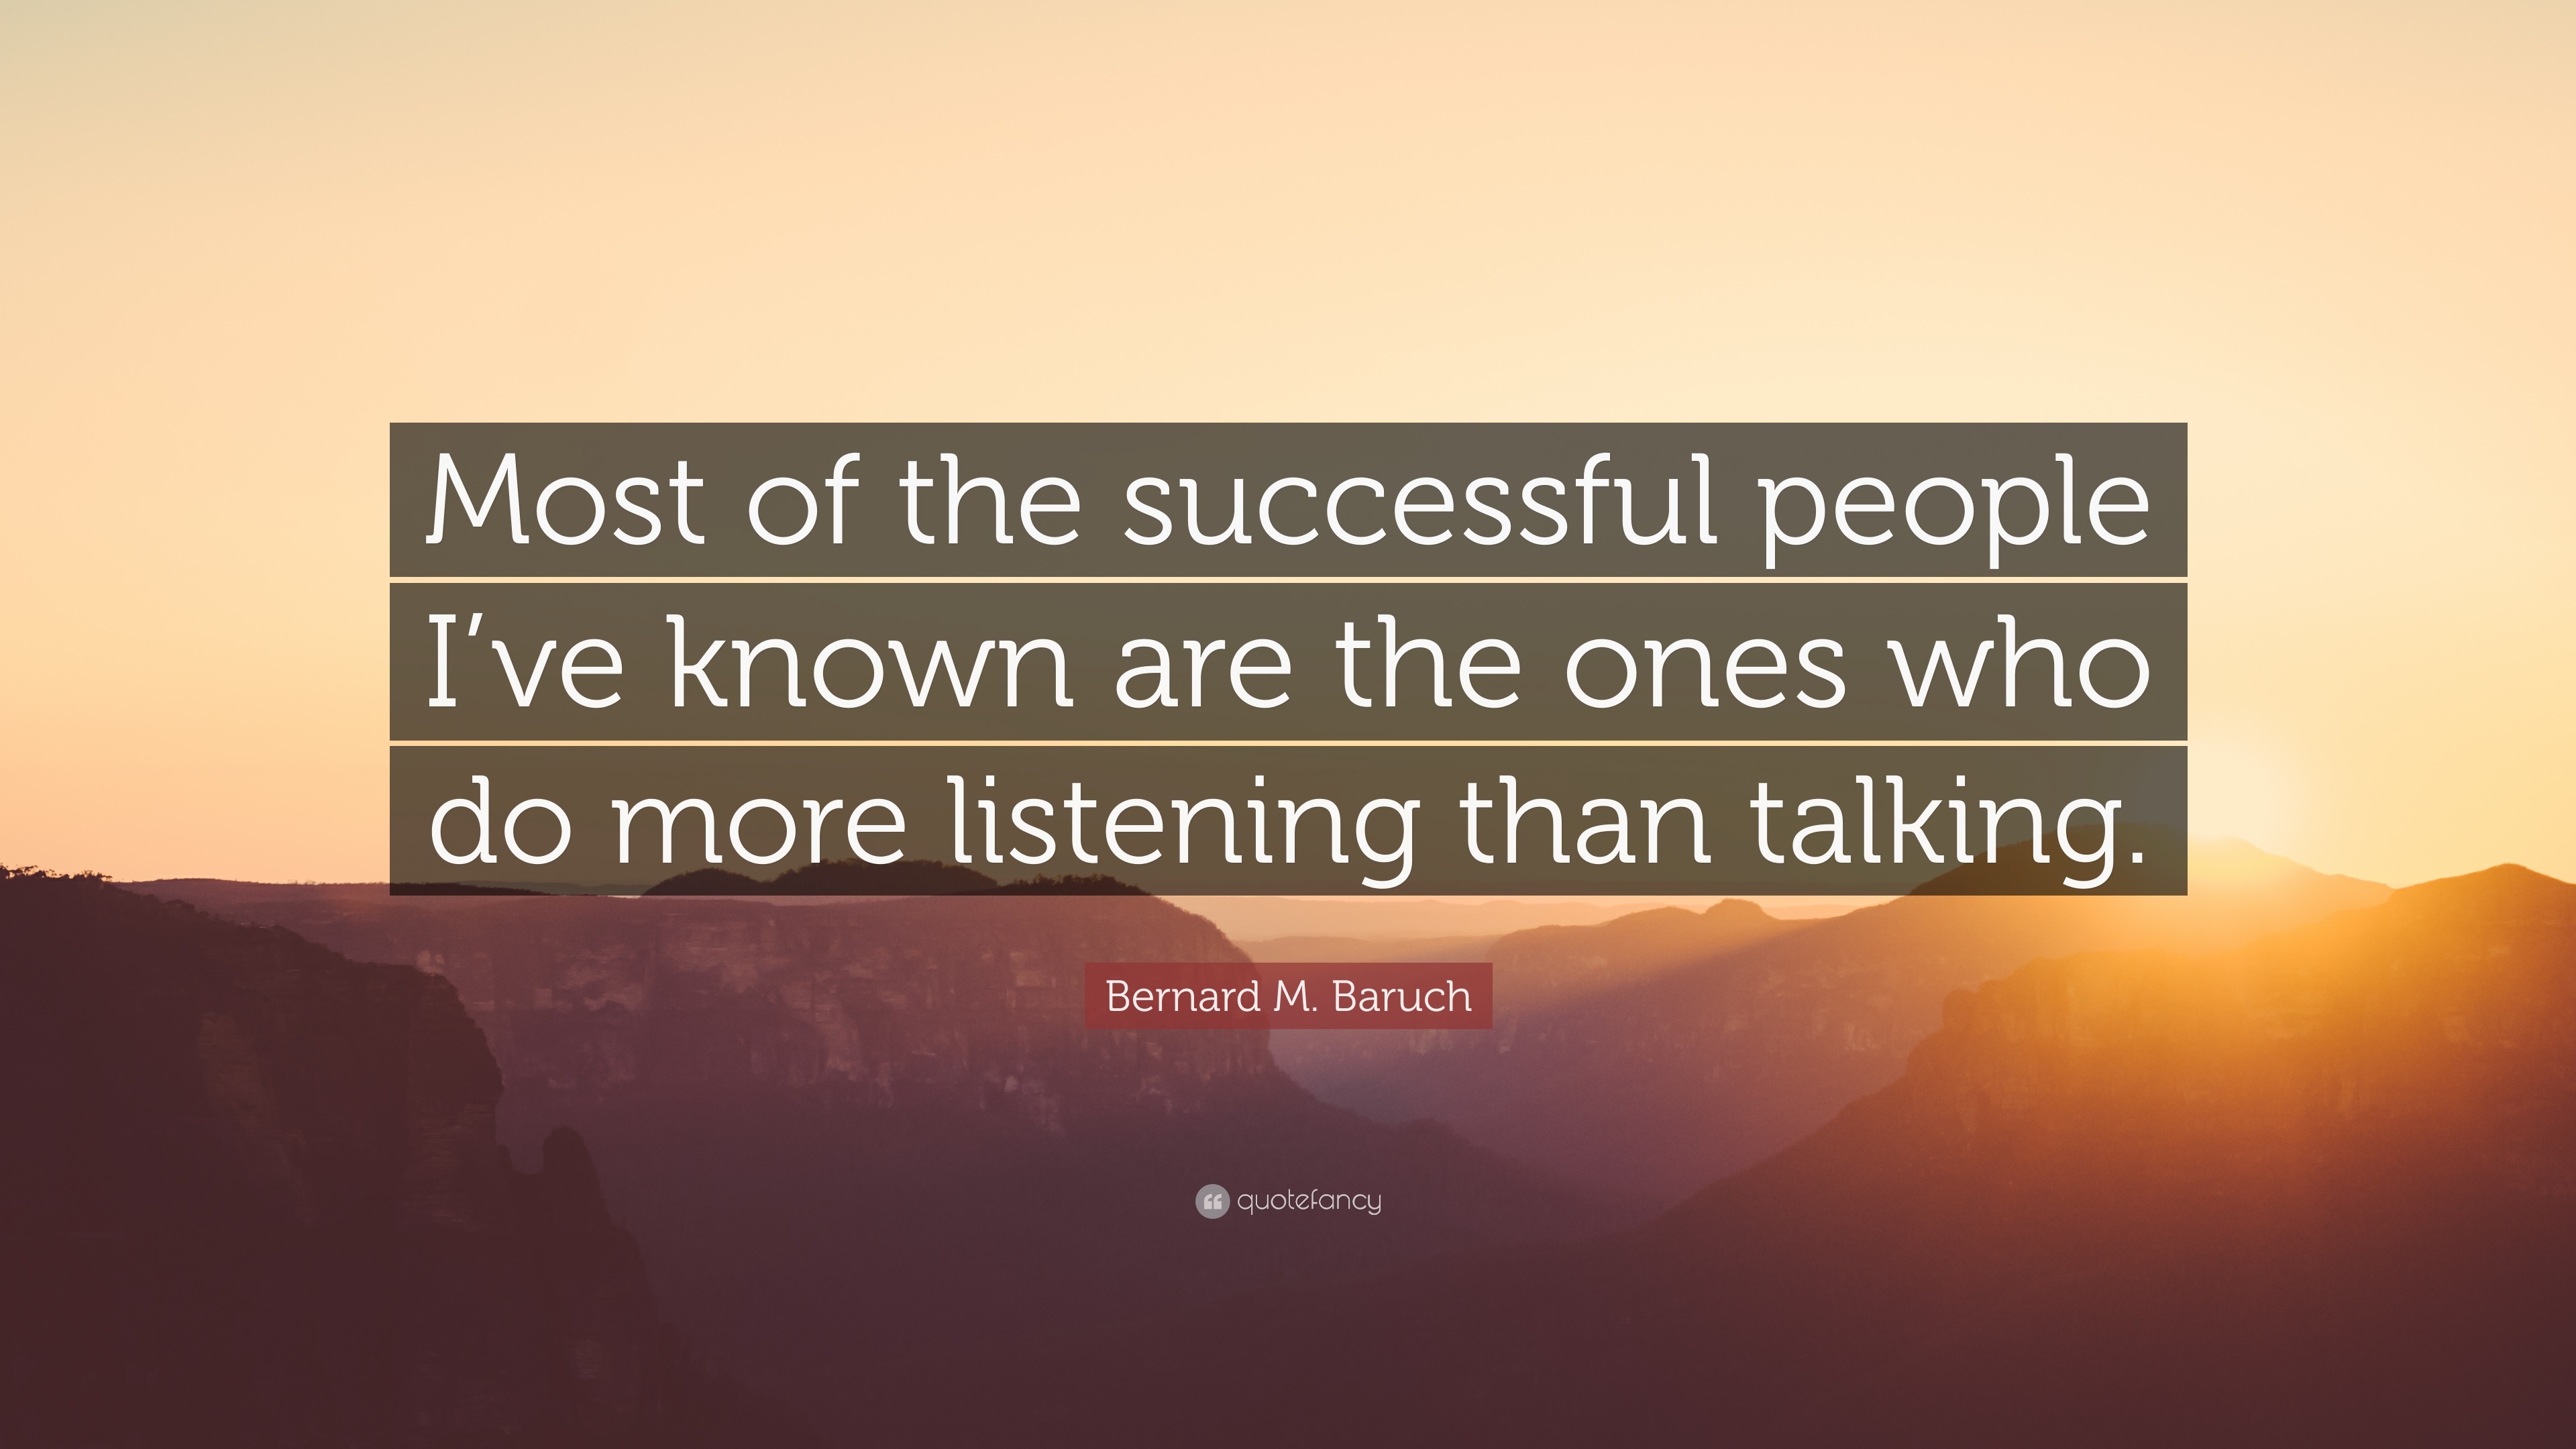 Bernard M. Baruch Quote: “Most of the successful people I’ve known are ...